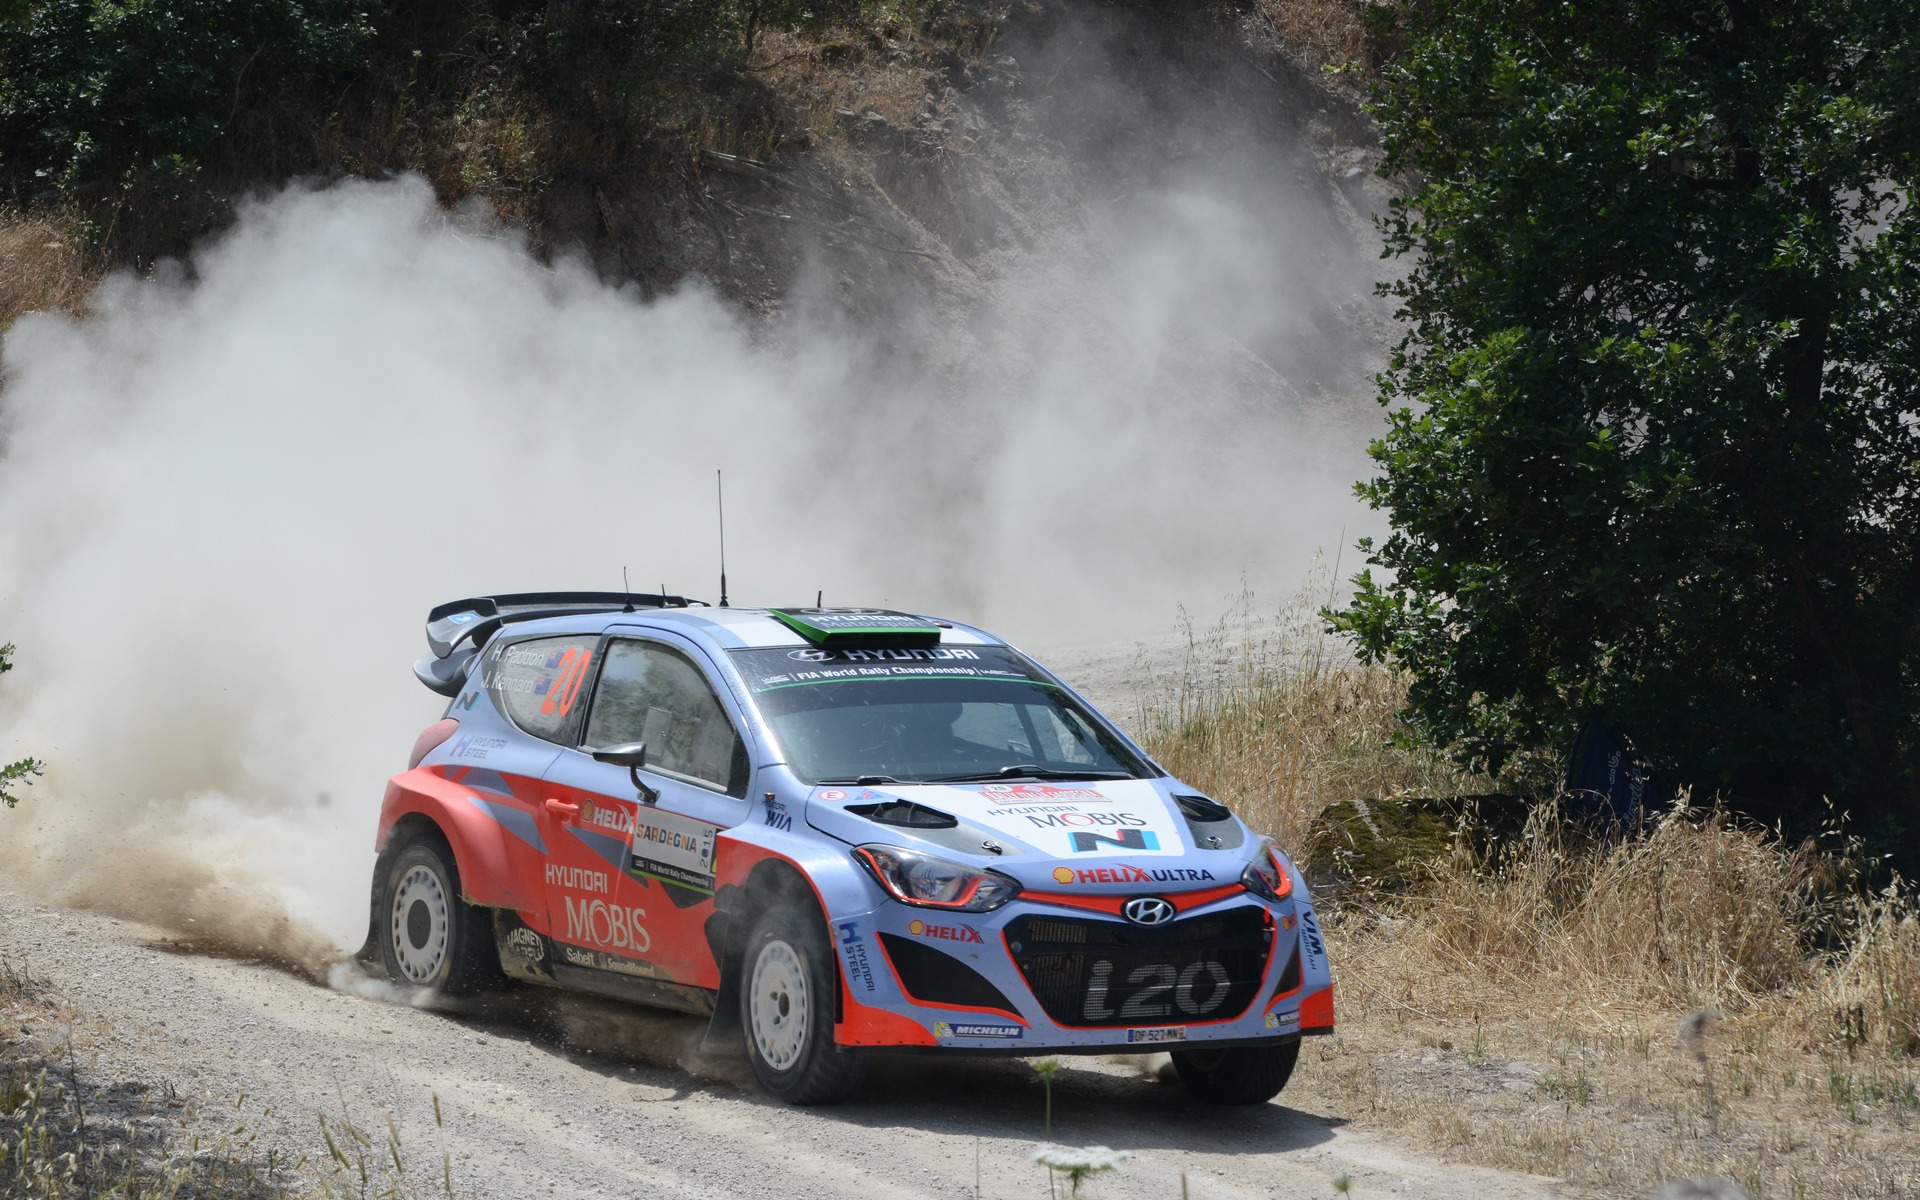 New Zealand’s Hayden Paddon came in second at the Italian Rally.